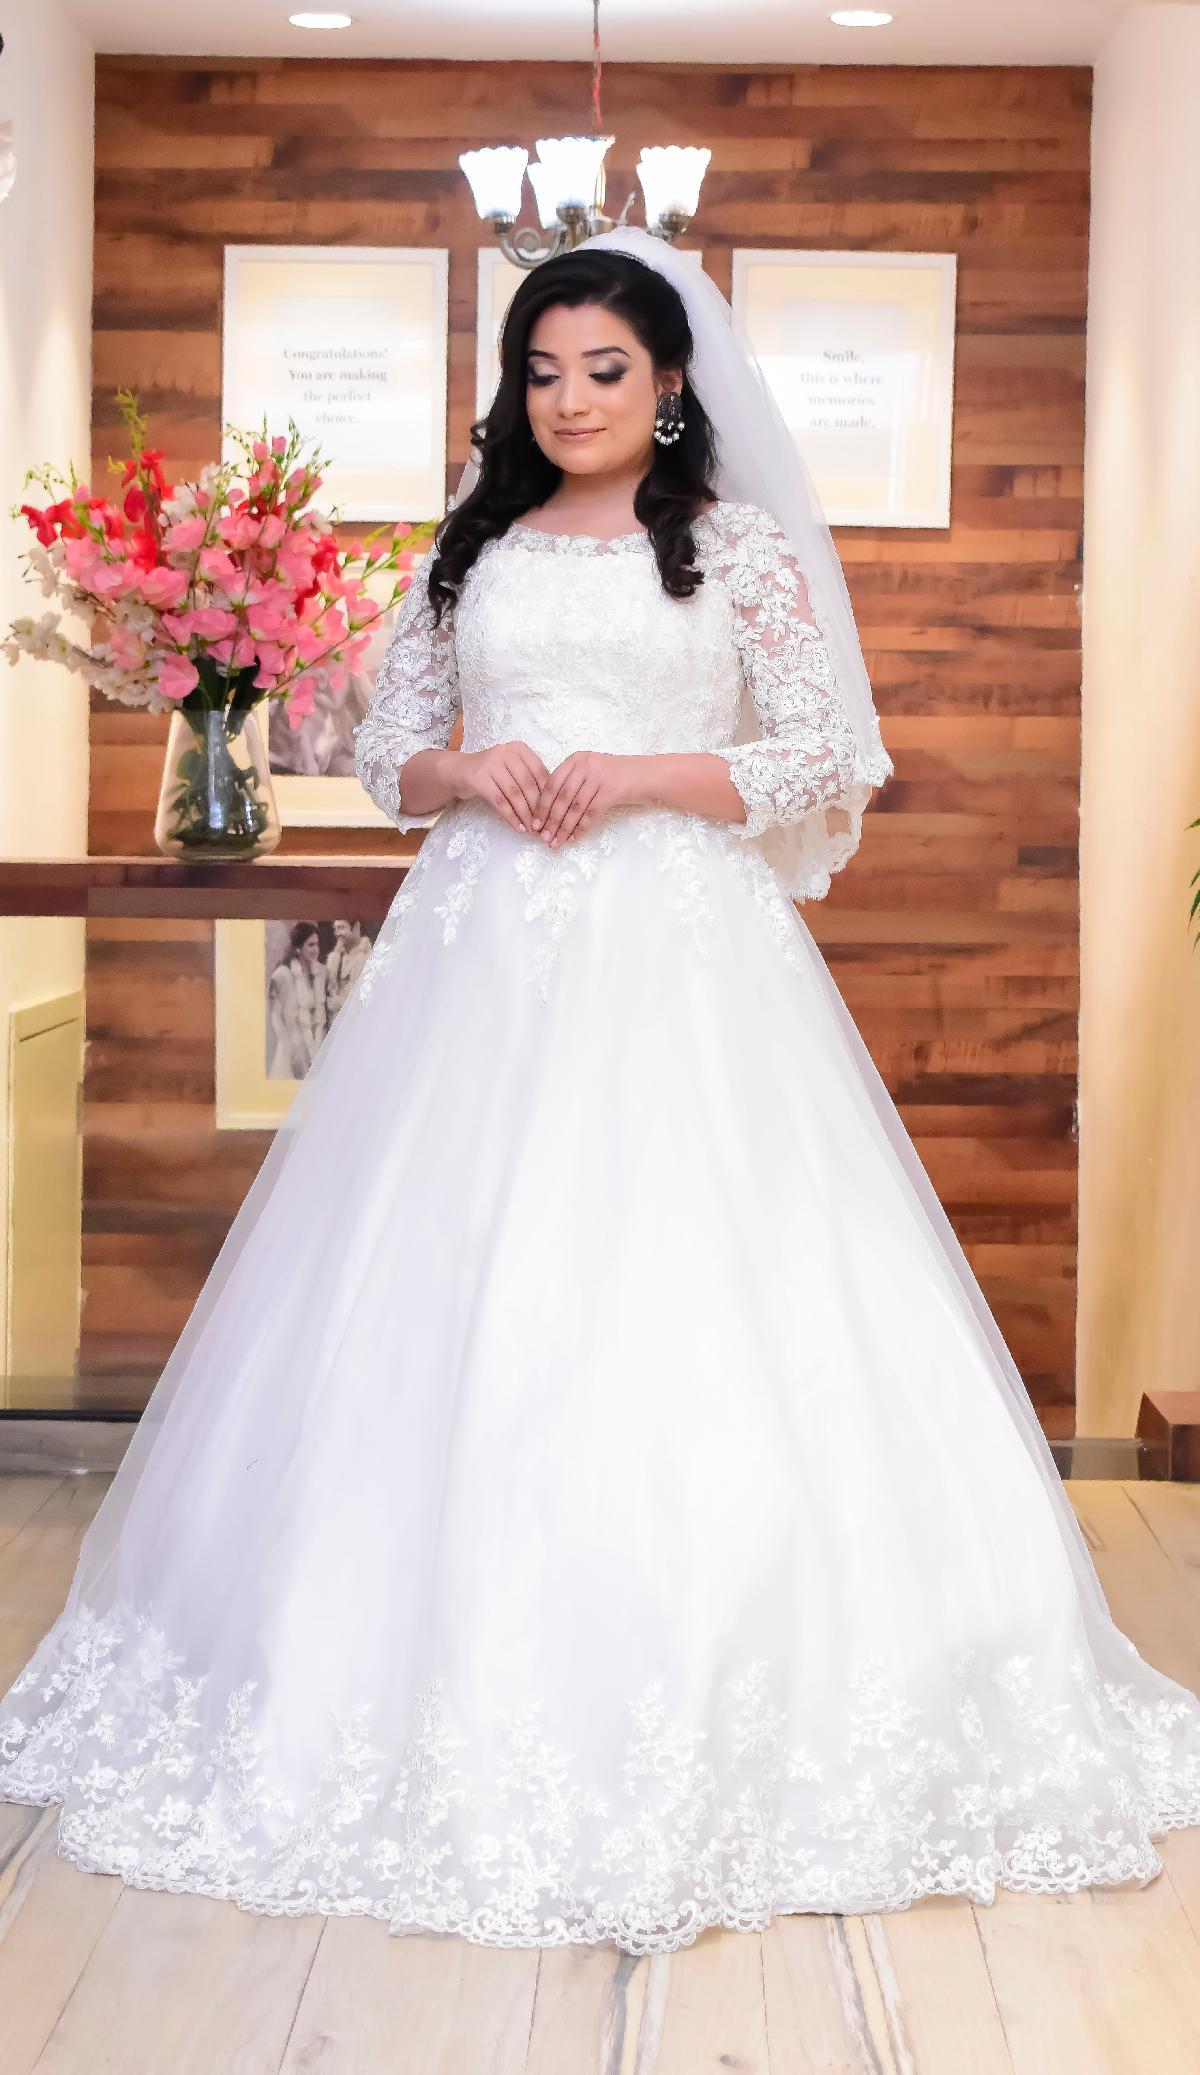 Experience more than 158 christian wedding gowns super hot